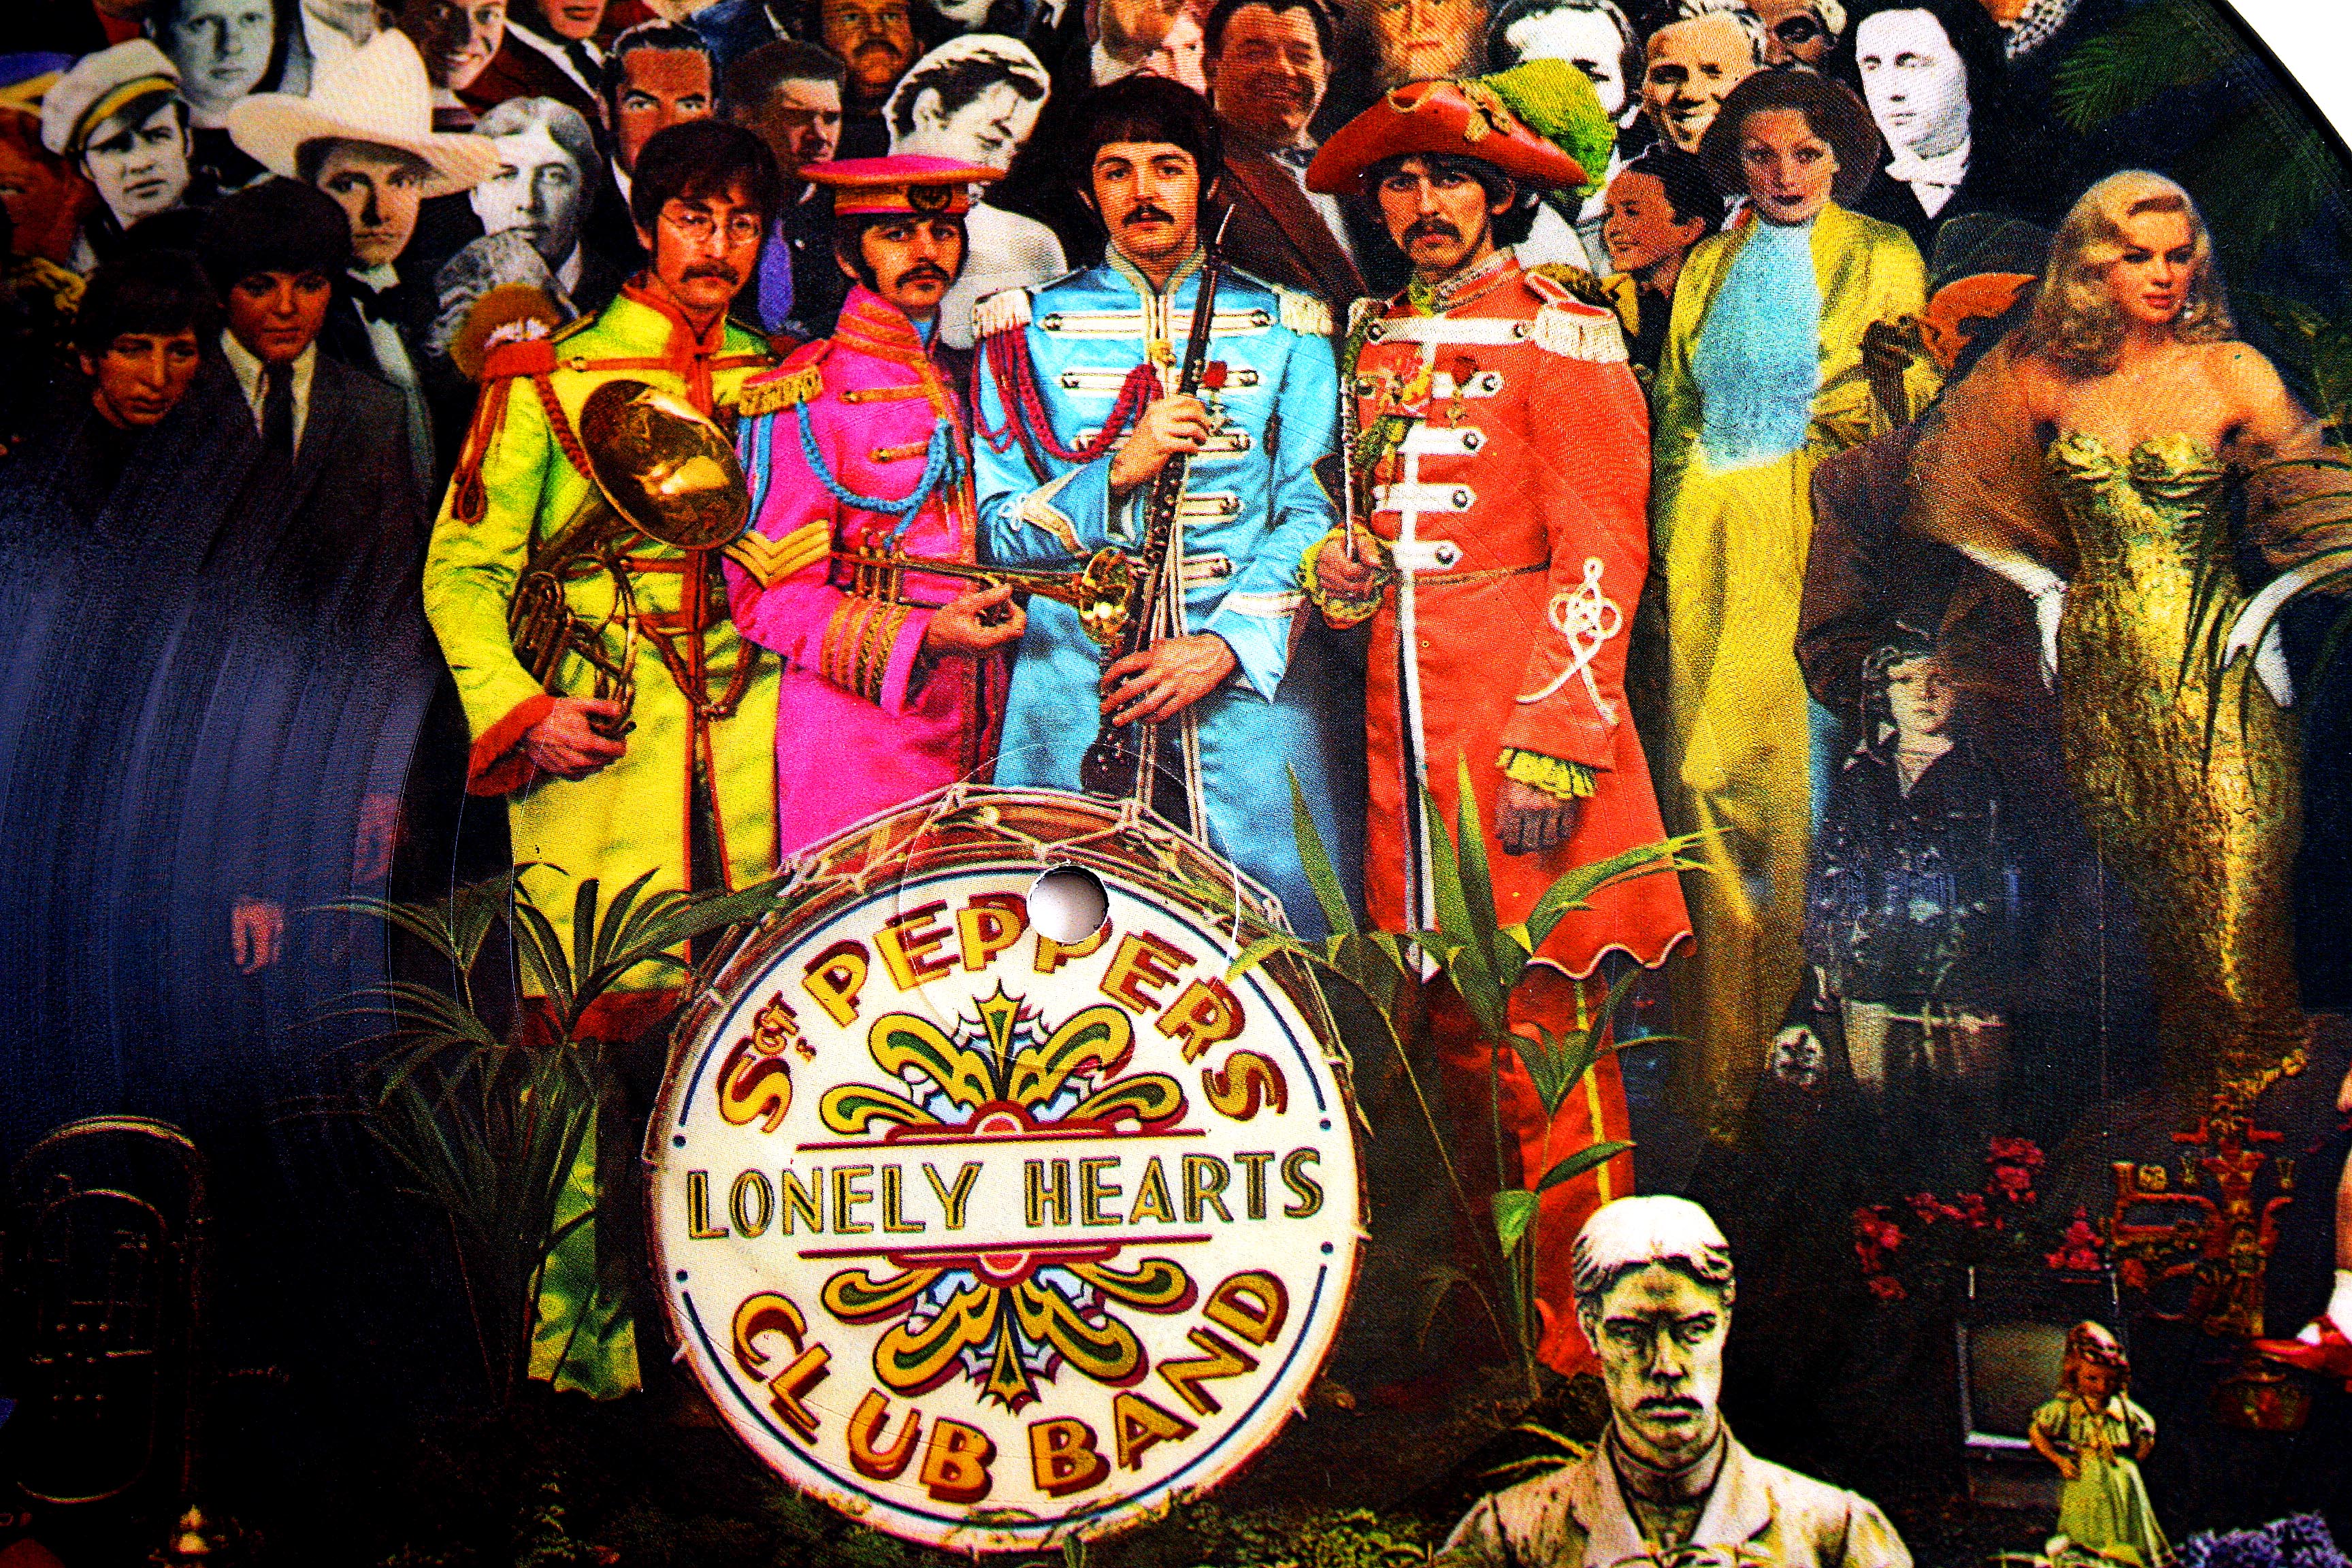 Arriba 69+ imagen sgt pepper's lonely hearts club band hd - Abzlocal.mx